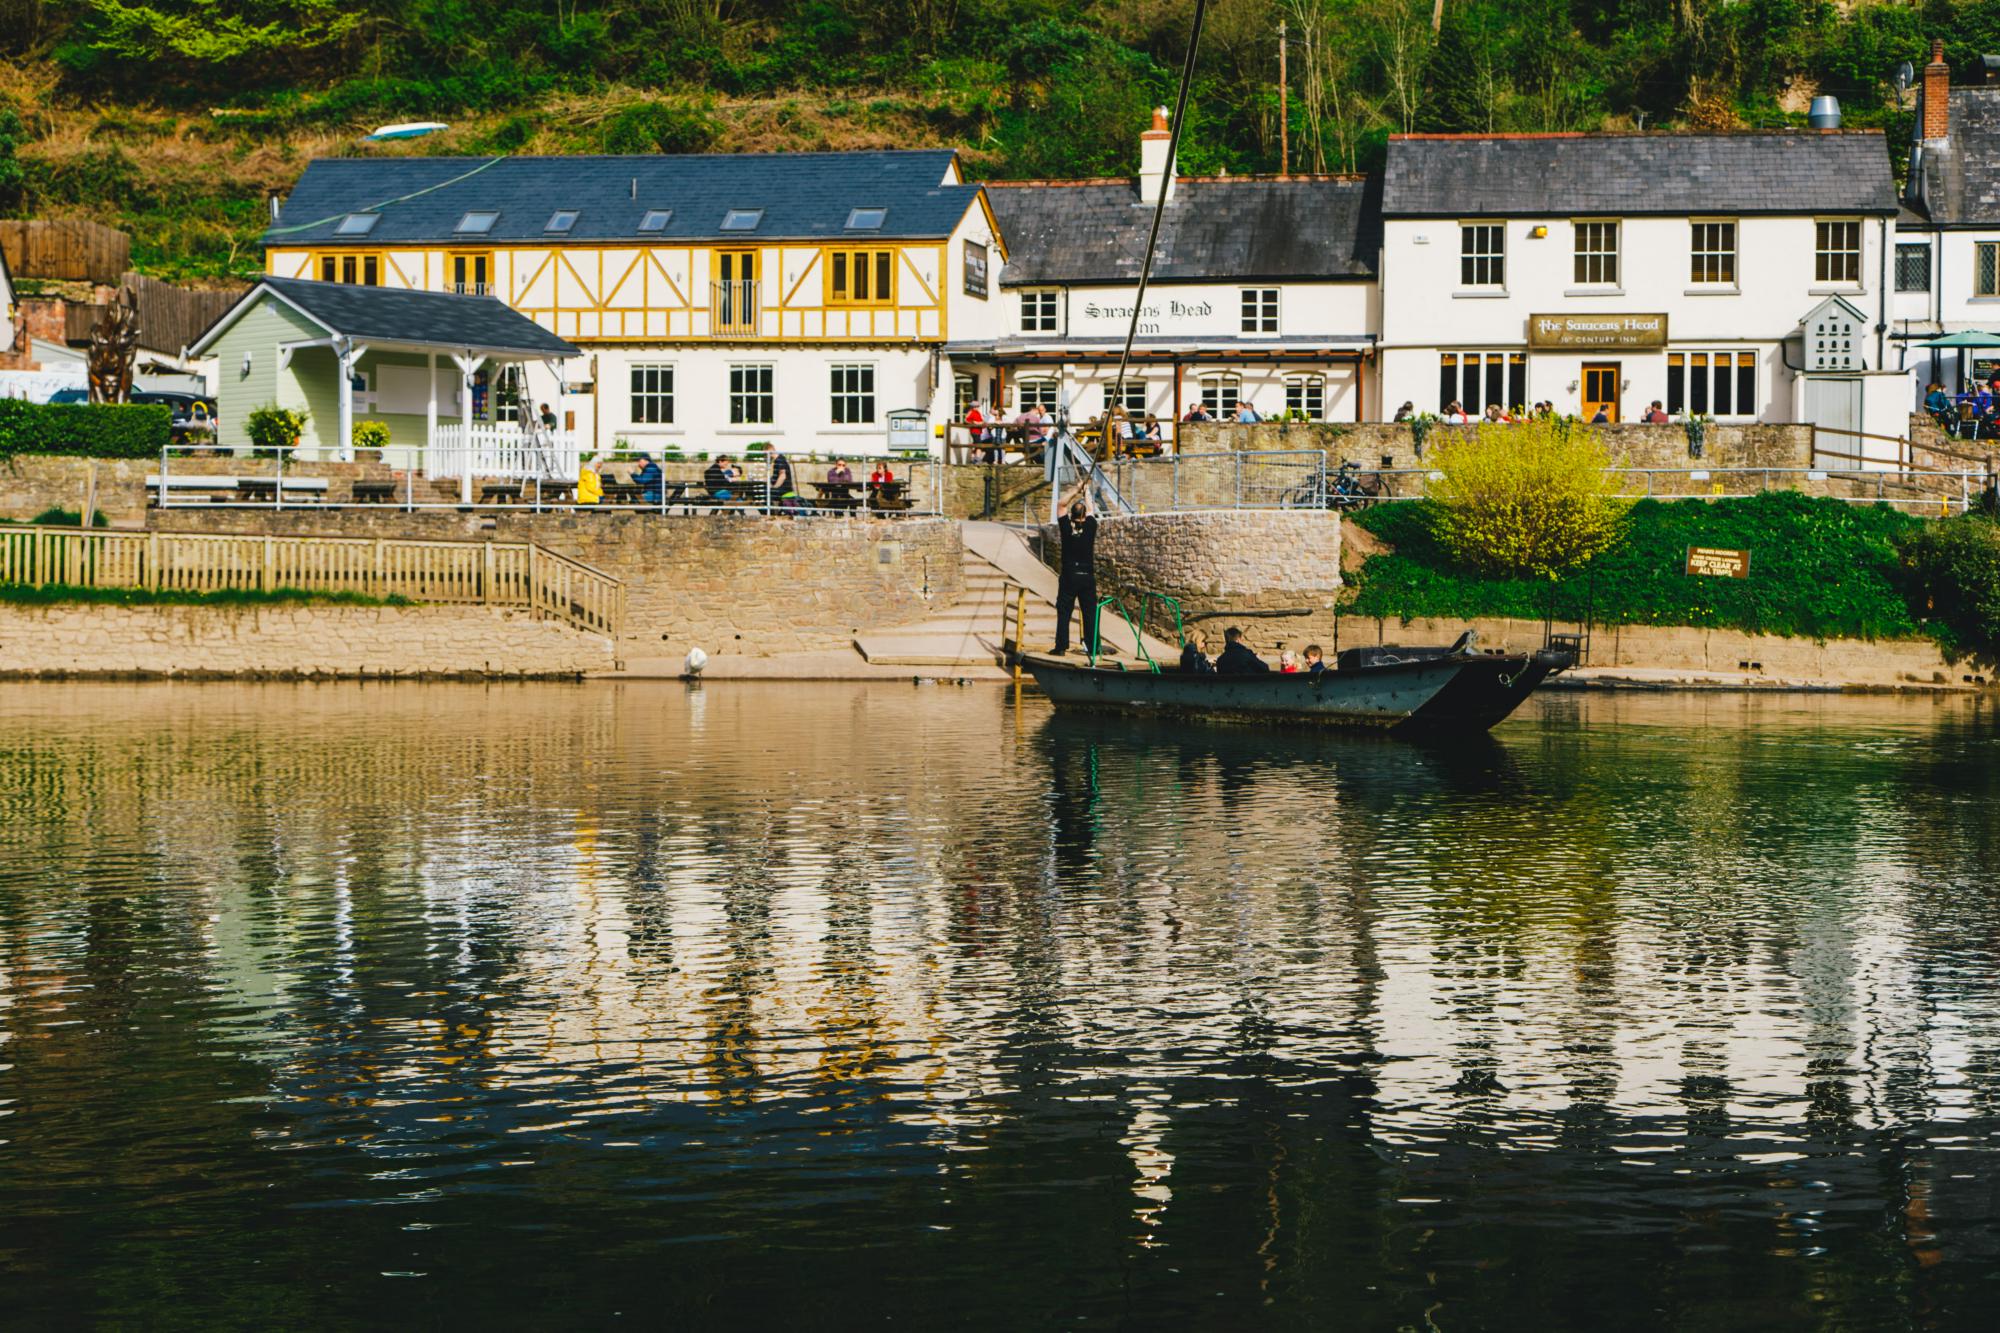 Hotels in Symonds Yat holidays at Cool Places